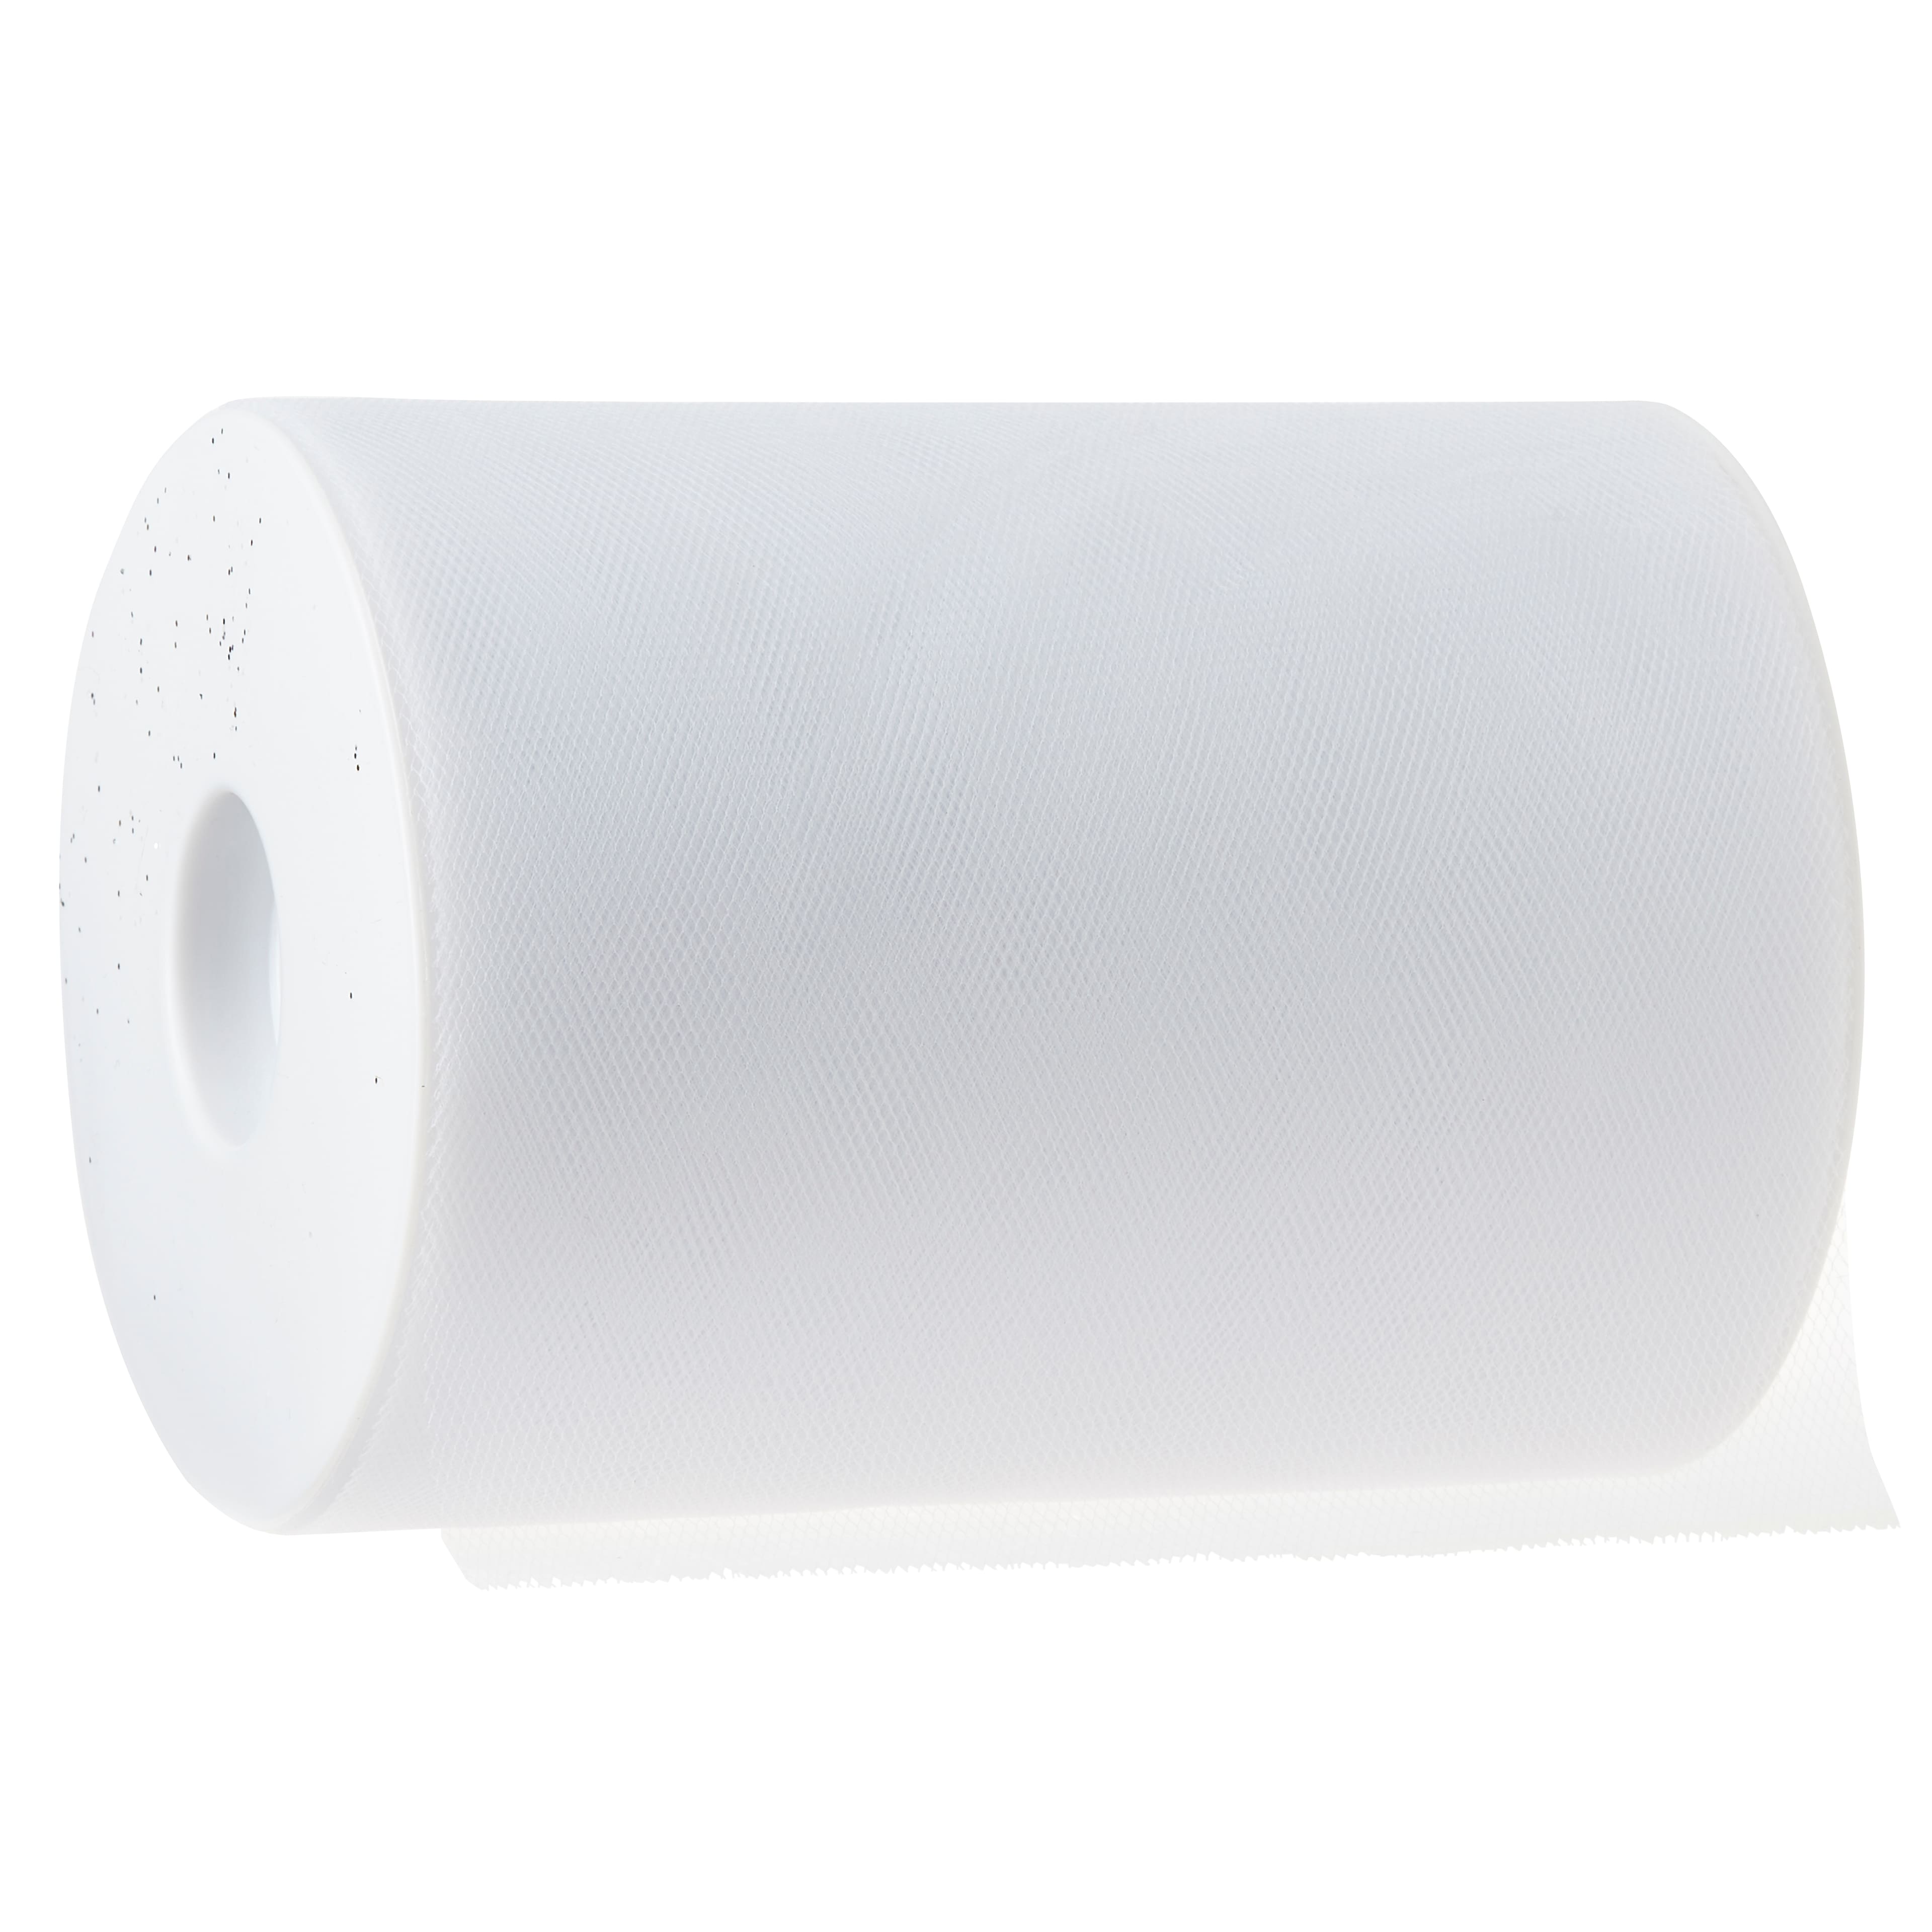 12 Pack: 6&#x22; x 100yd. Tulle by Celebrate It&#x2122; Occasions&#x2122;